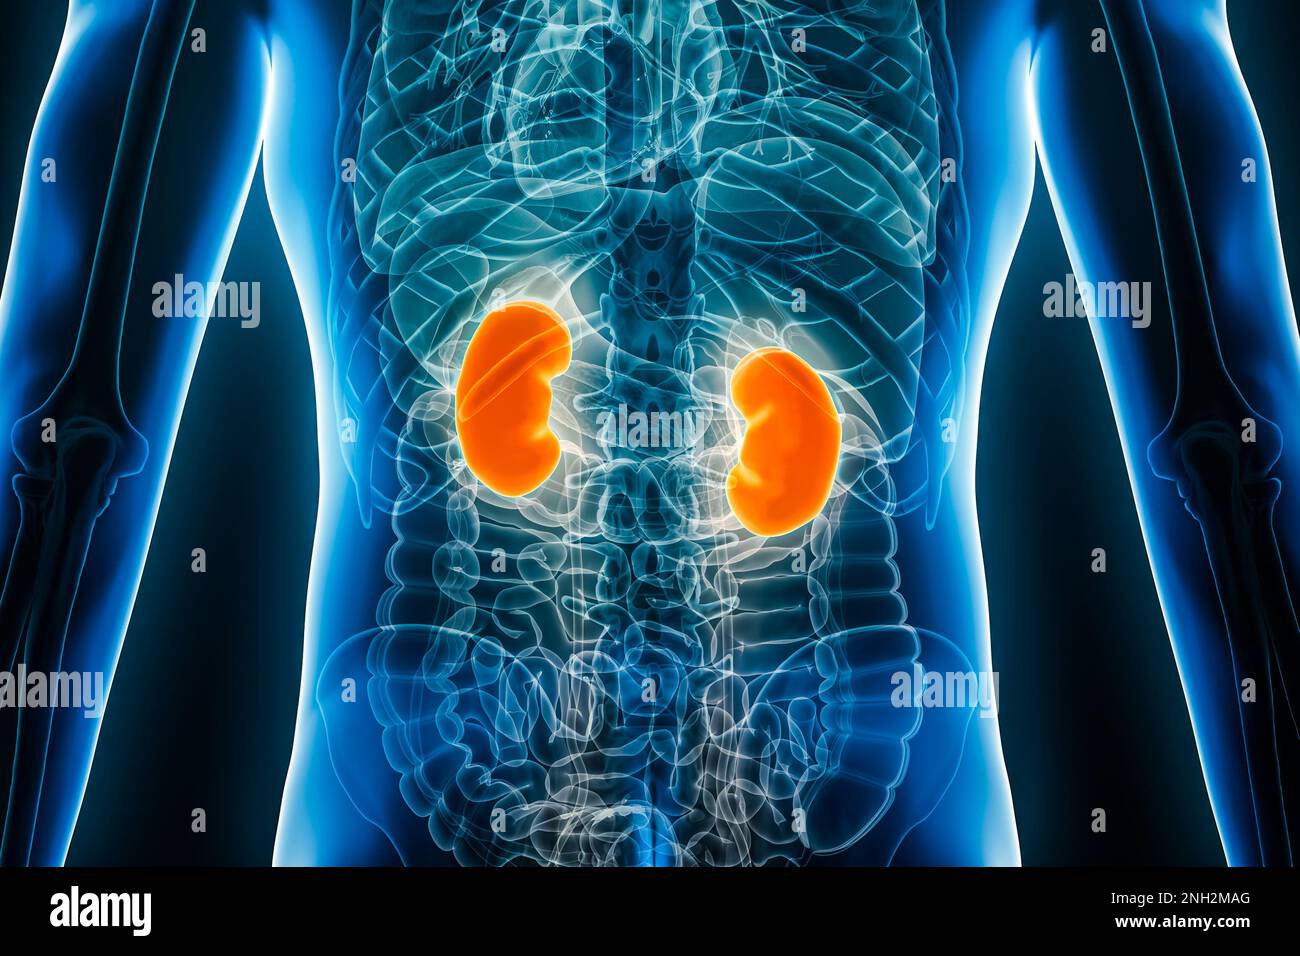 Xray posterior or back view of human kidneys 3D rendering illustration with male body contours. Anatomy, organ of urinary system, nephrology, medical, Stock Photo